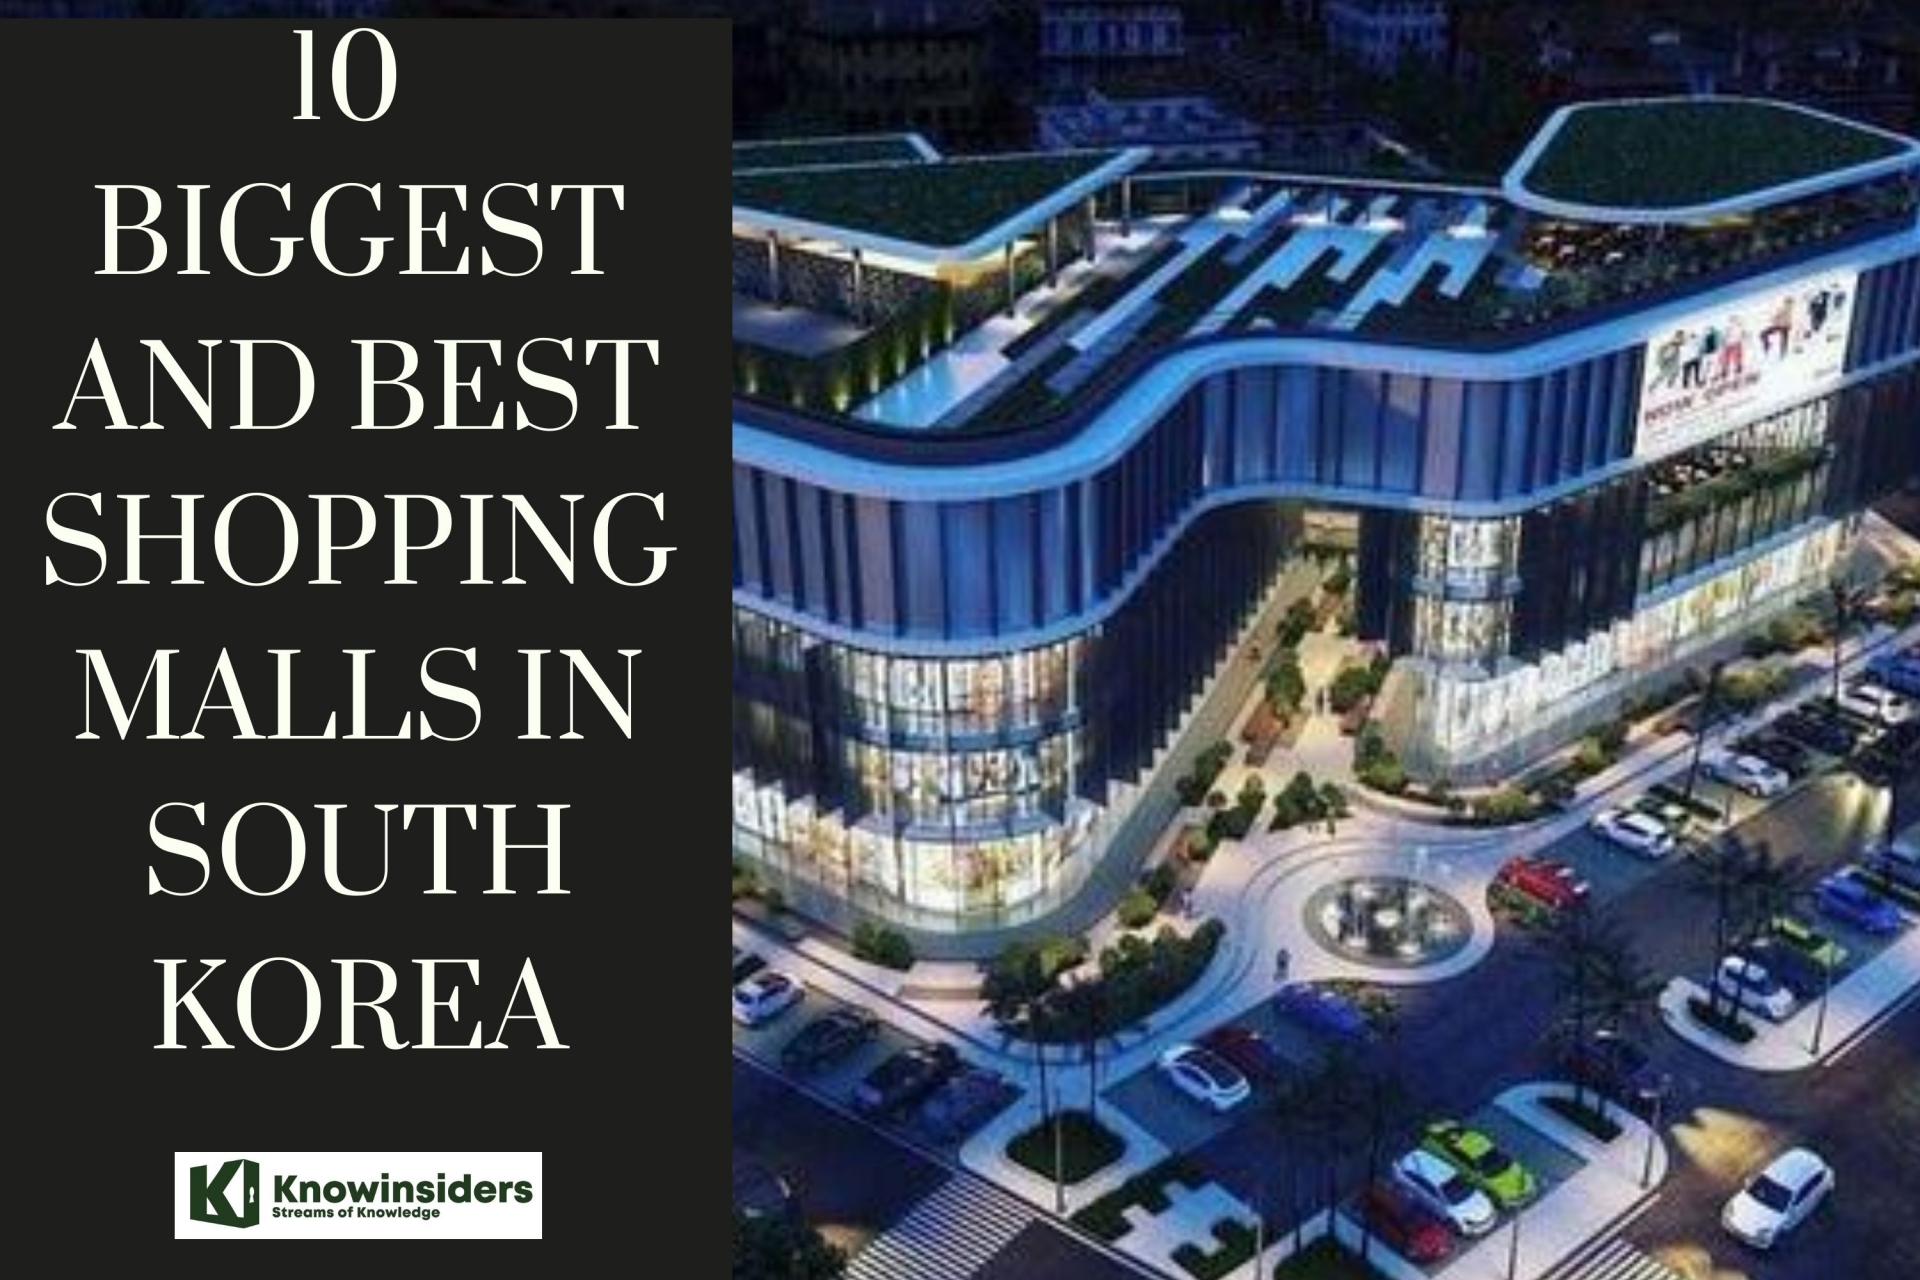 10 Biggest and Best Shopping Malls For Foreigner in South Korea